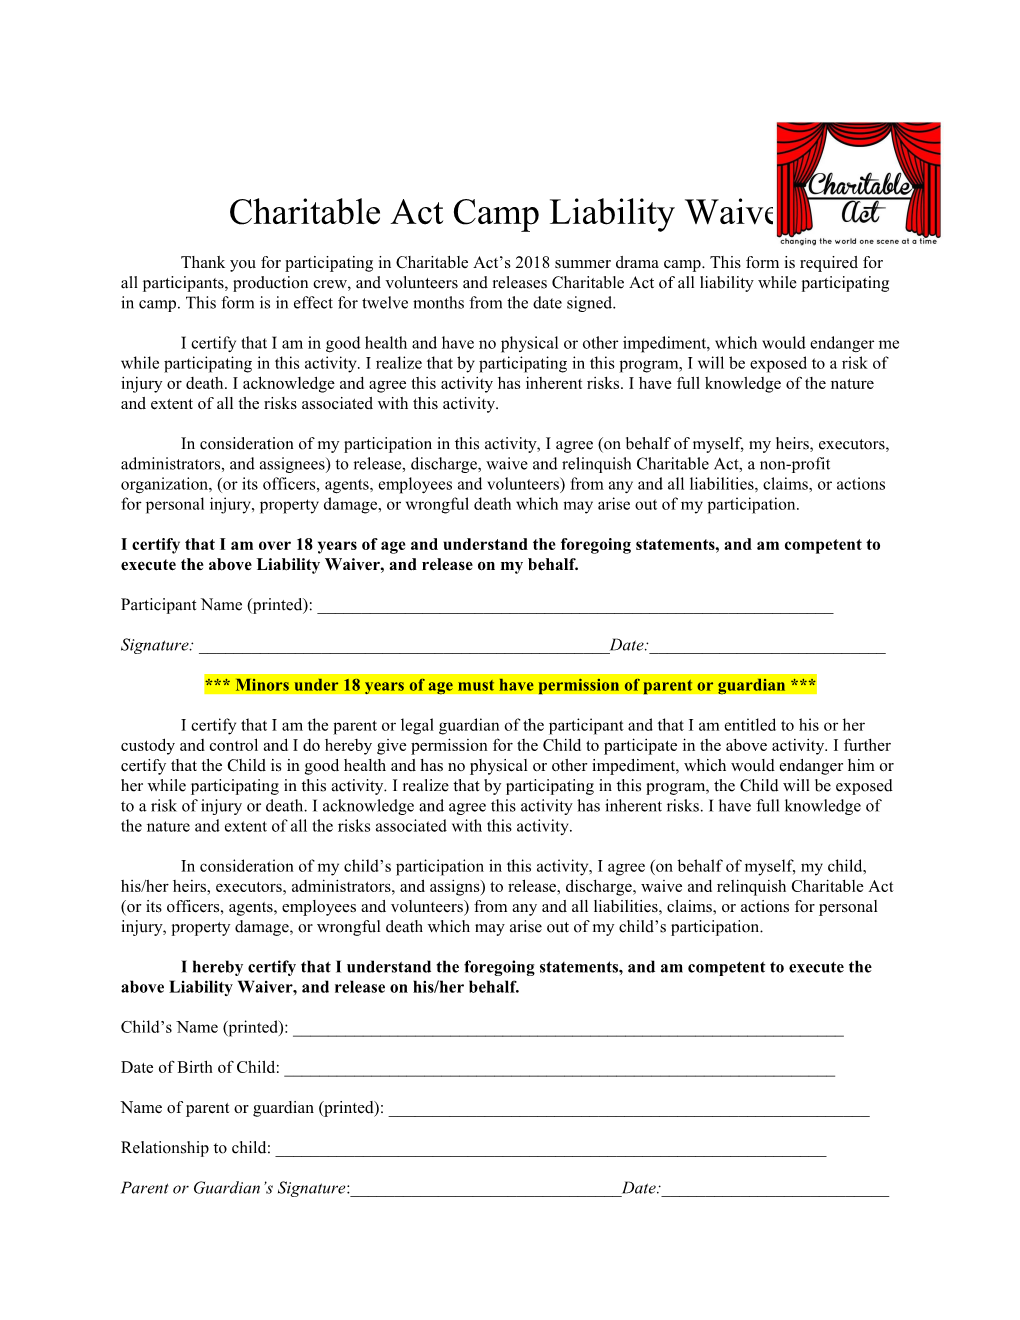 Charitable Act Camp Liability Waiver